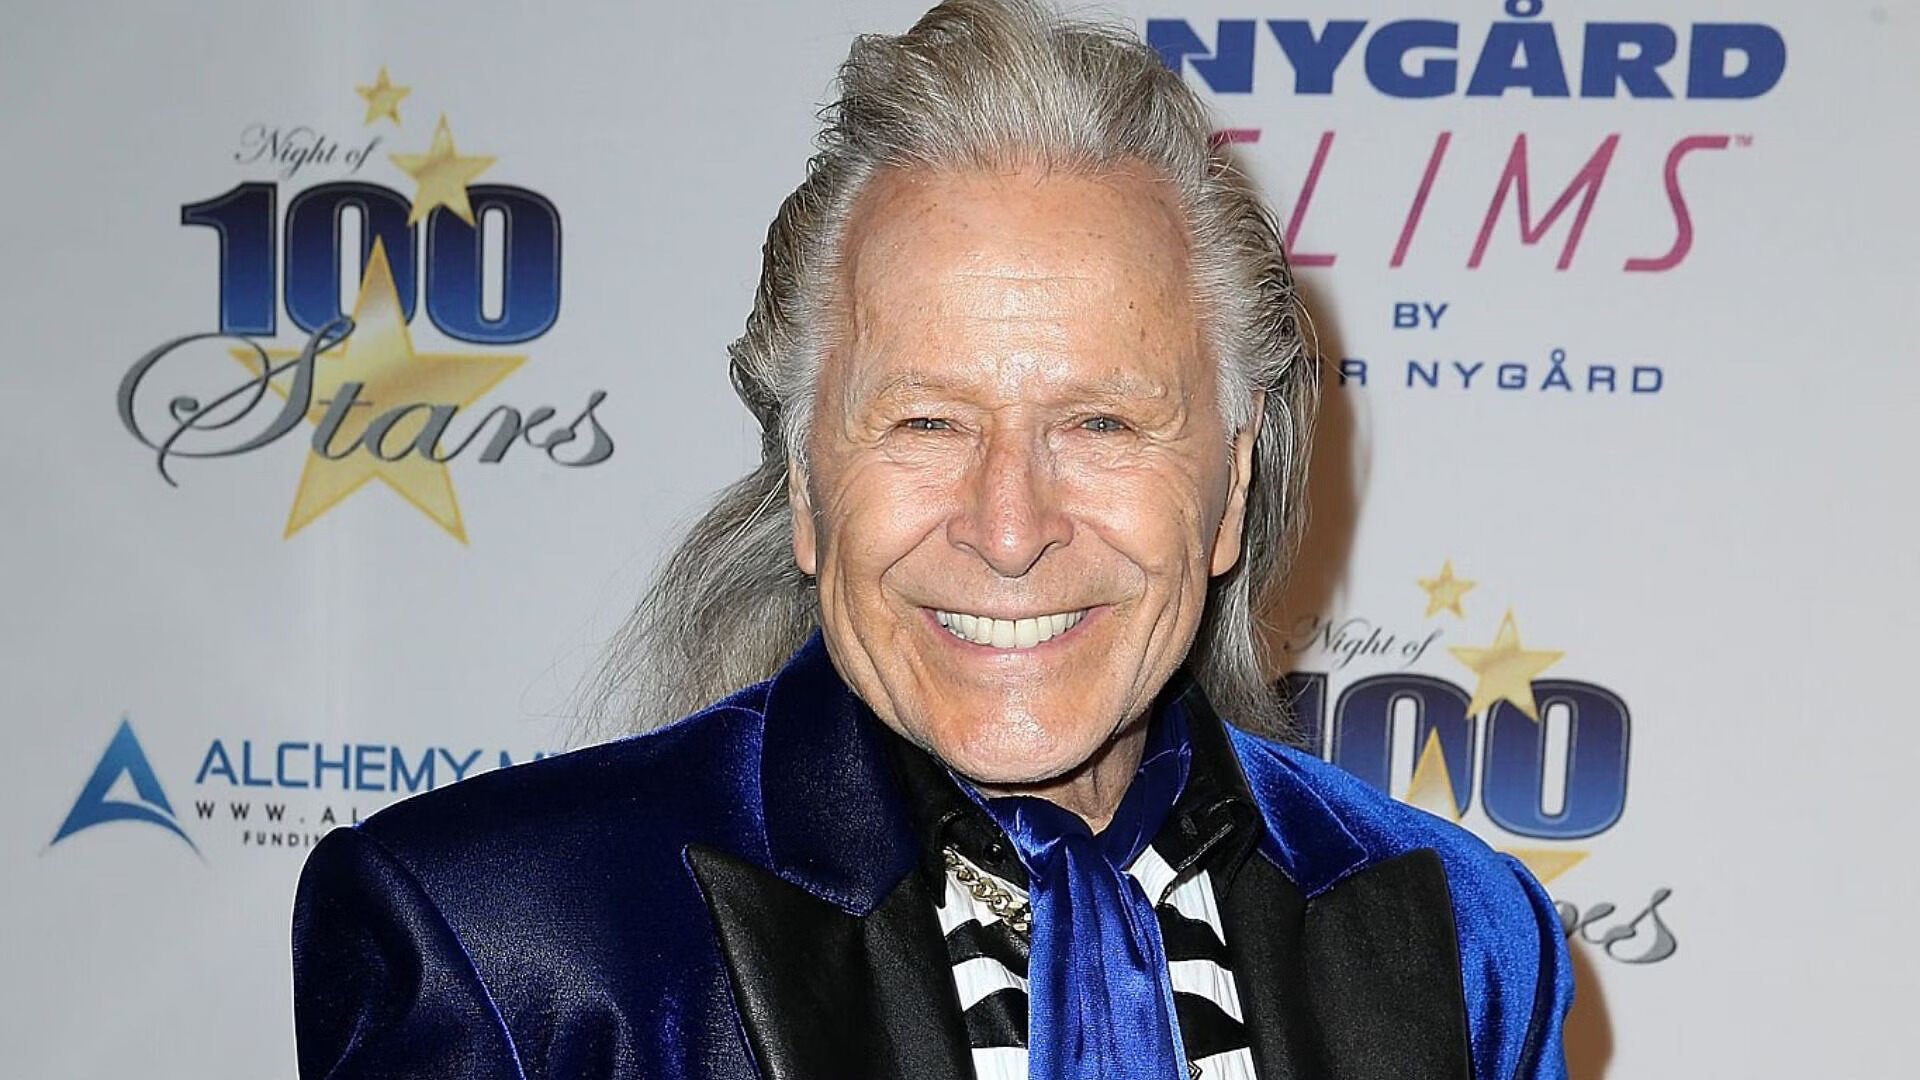 8-intriguing-facts-about-peter-nygard